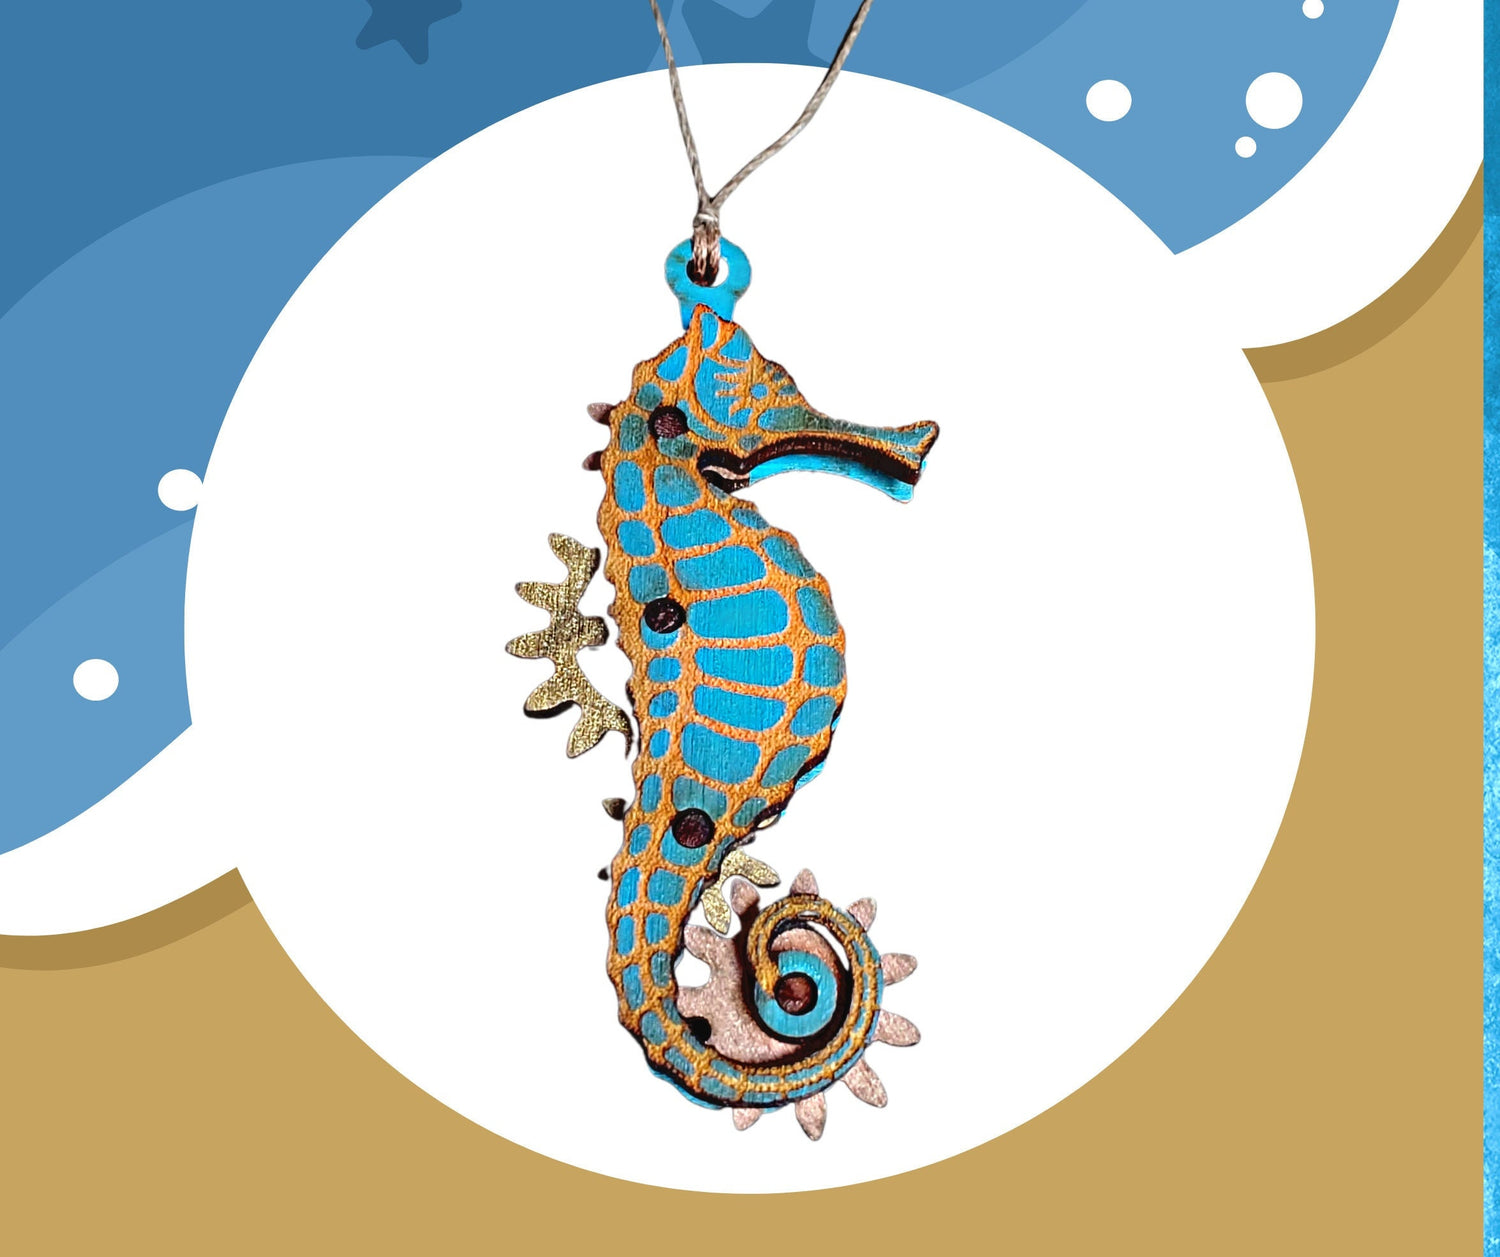 SALE! Steampunk Kinetic Seahorse Pendant with Moving Gears! Lord and Lady Towers